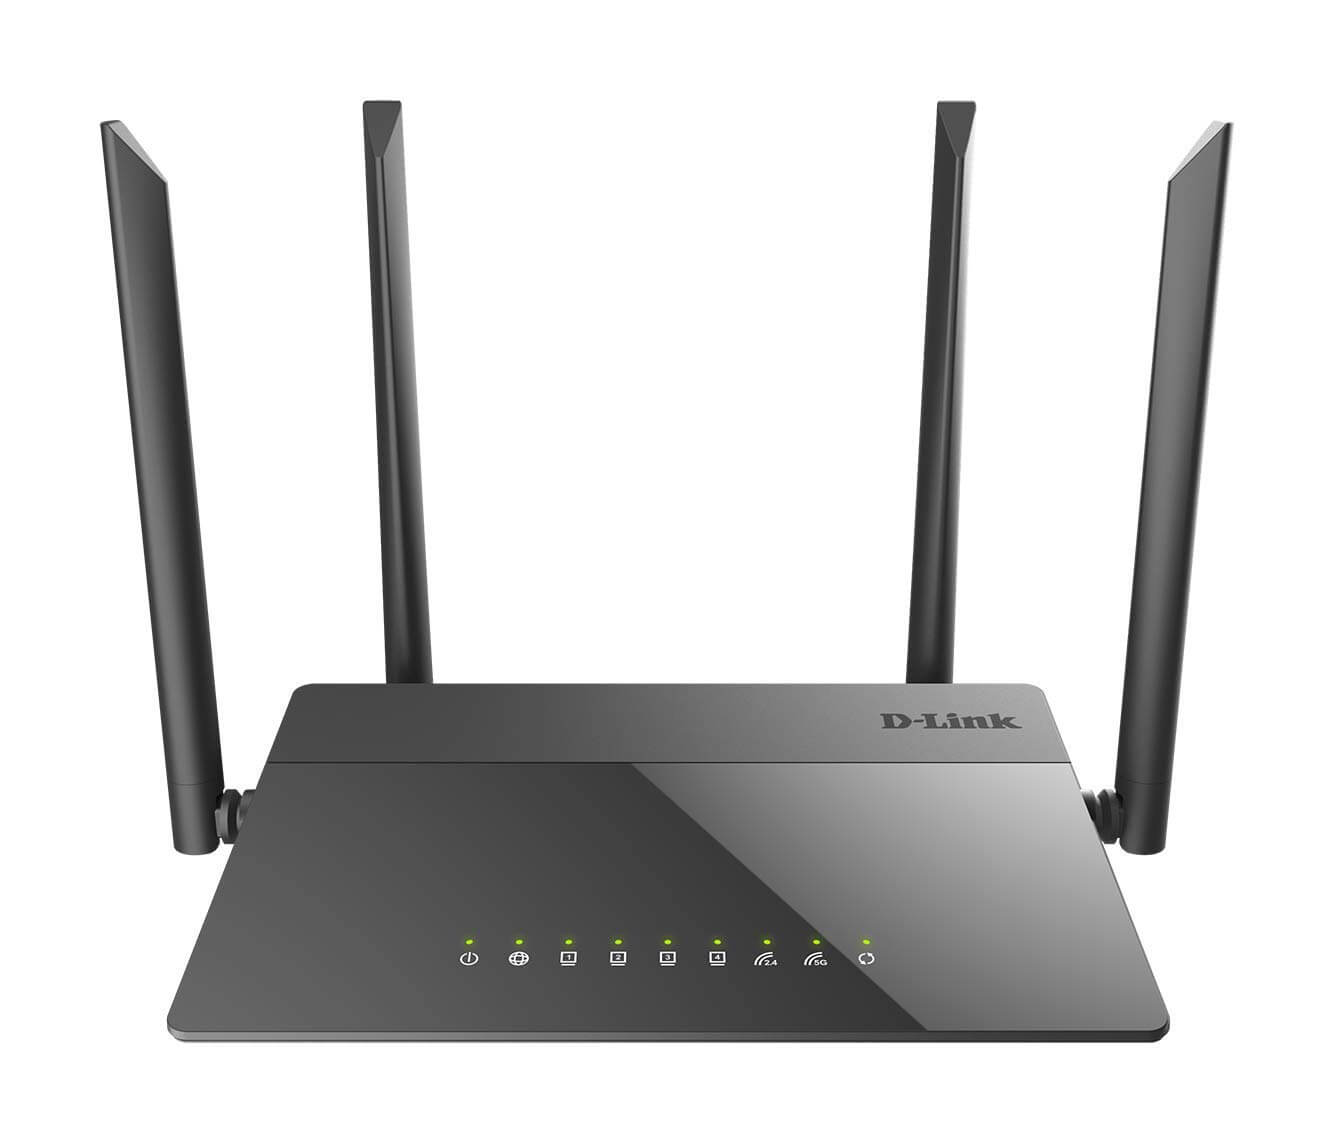 D-Link DIR-841 AC1200 MU-MIMO Wi-Fi Gigabit 4 Antenna Router with Fast Ethernet LAN Ports